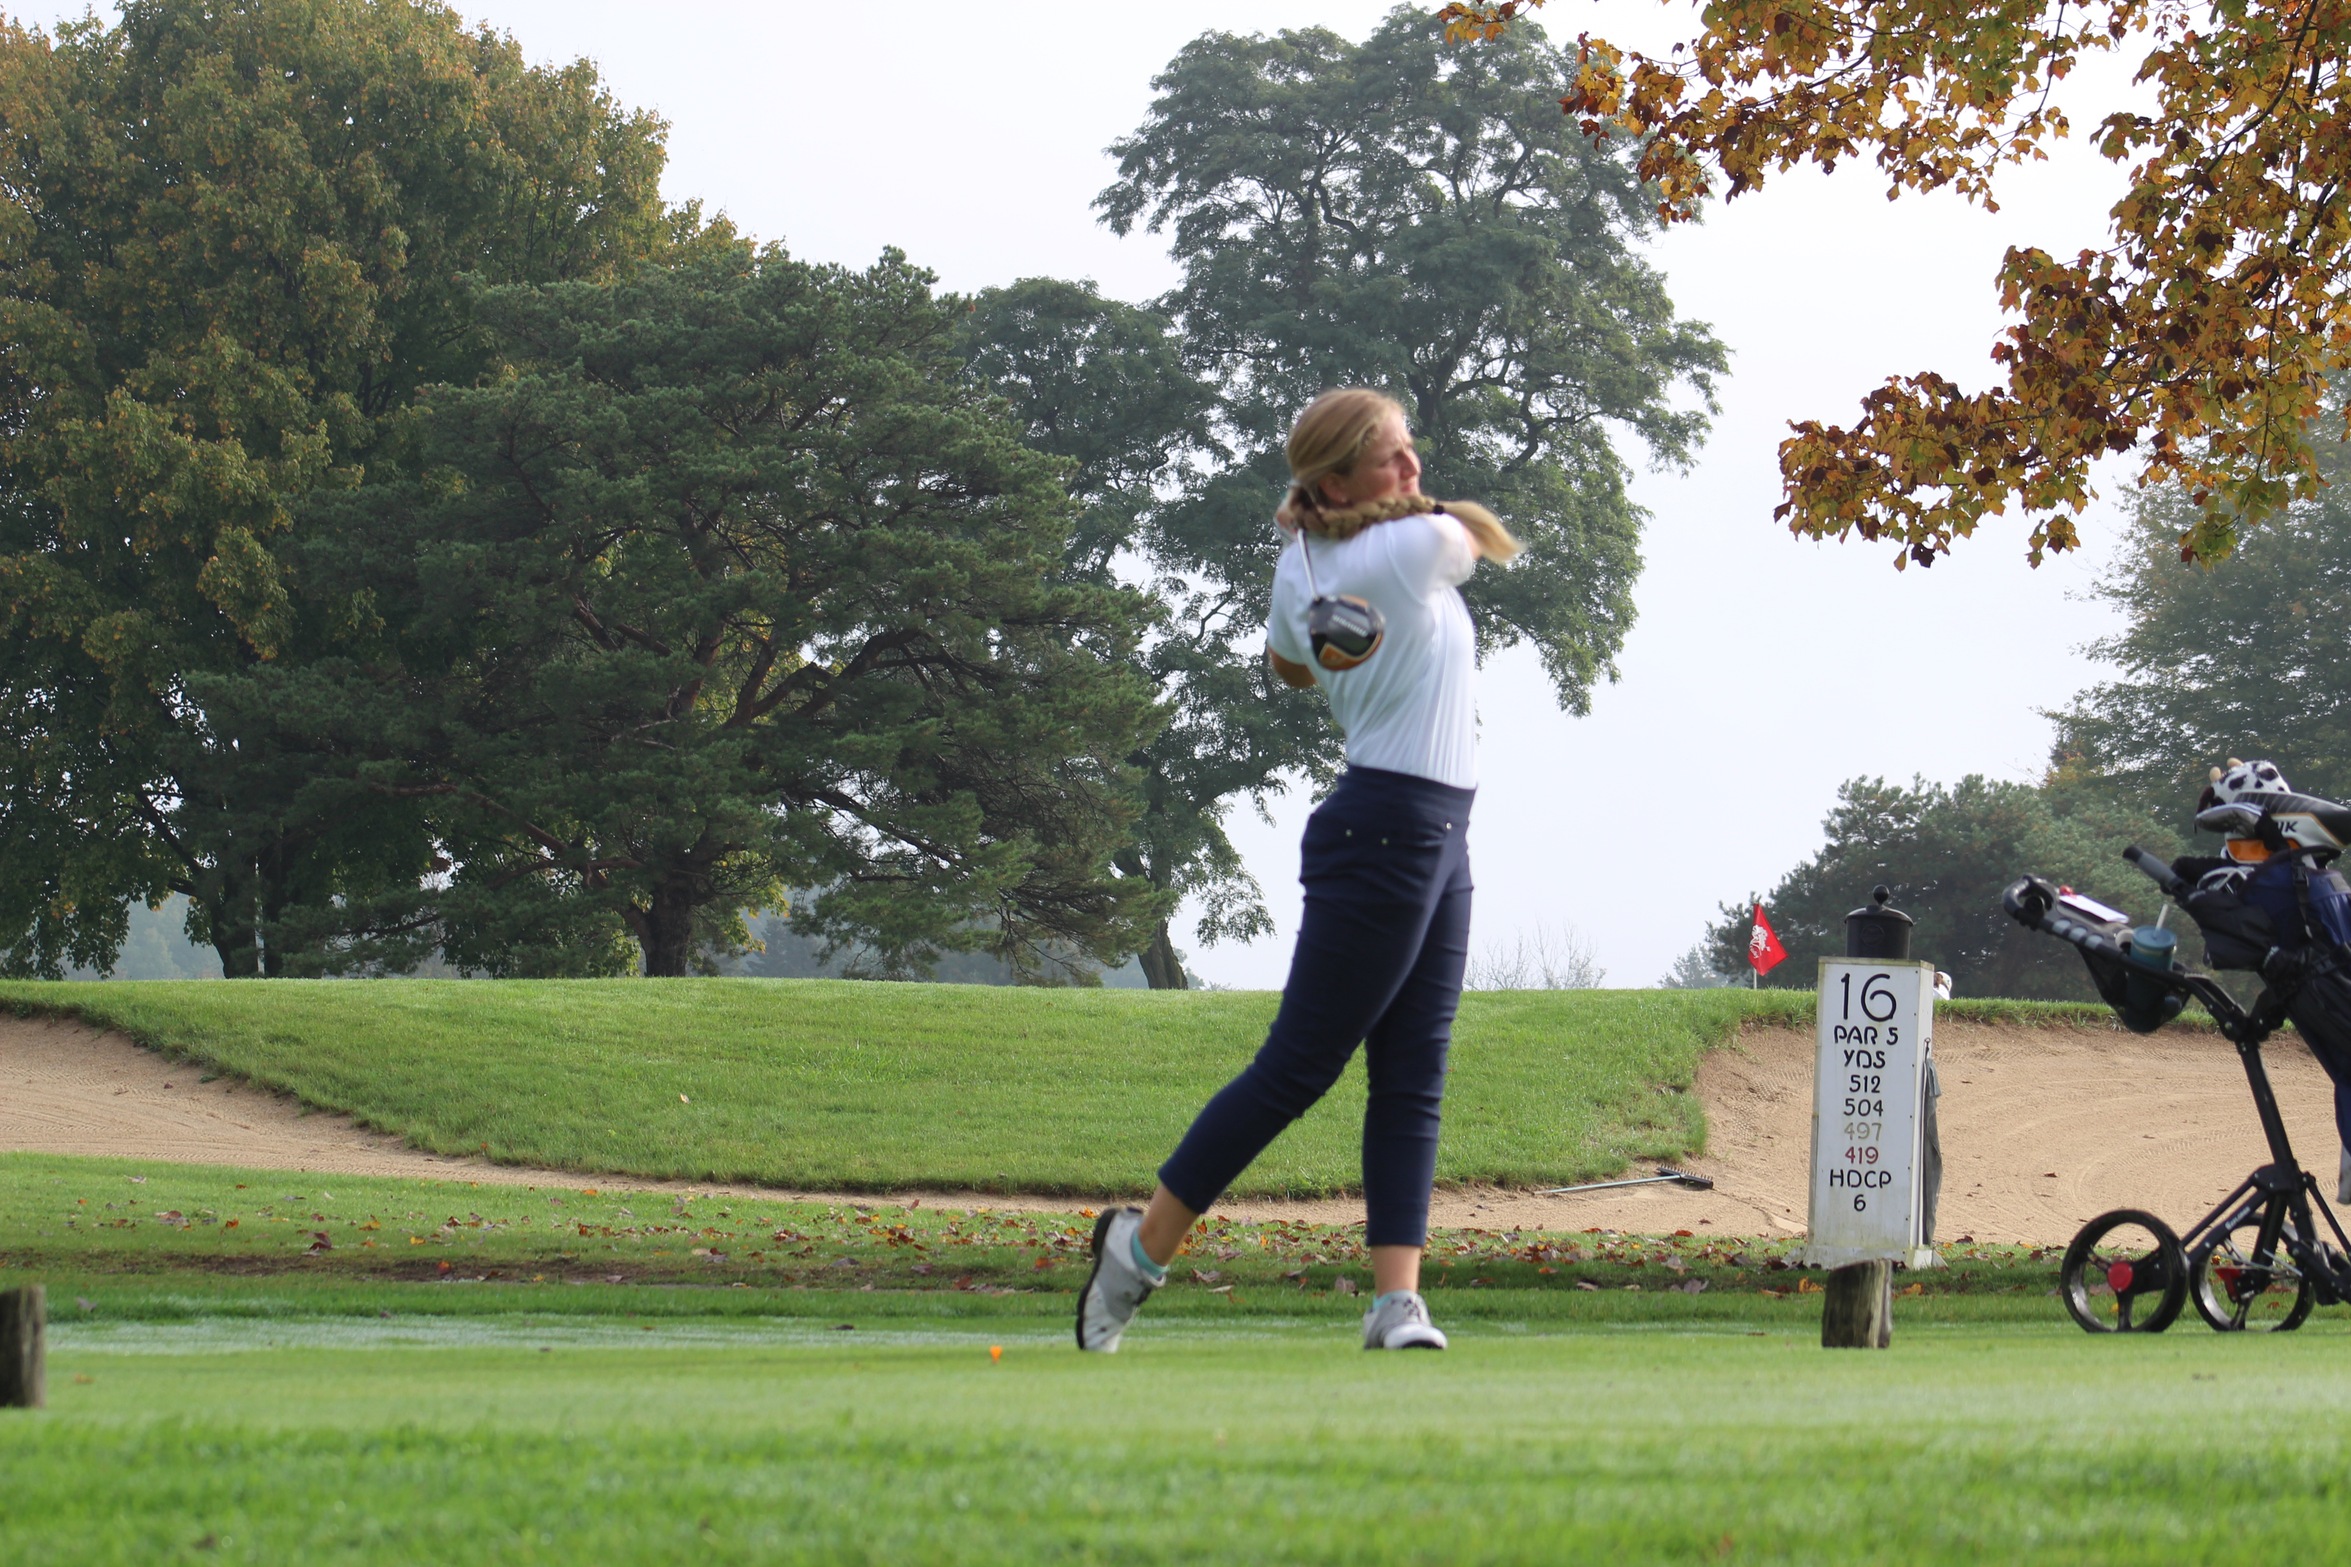 Fall Portion of the Trine Women's Golf Schedule Wraps Up at MIAA Championship